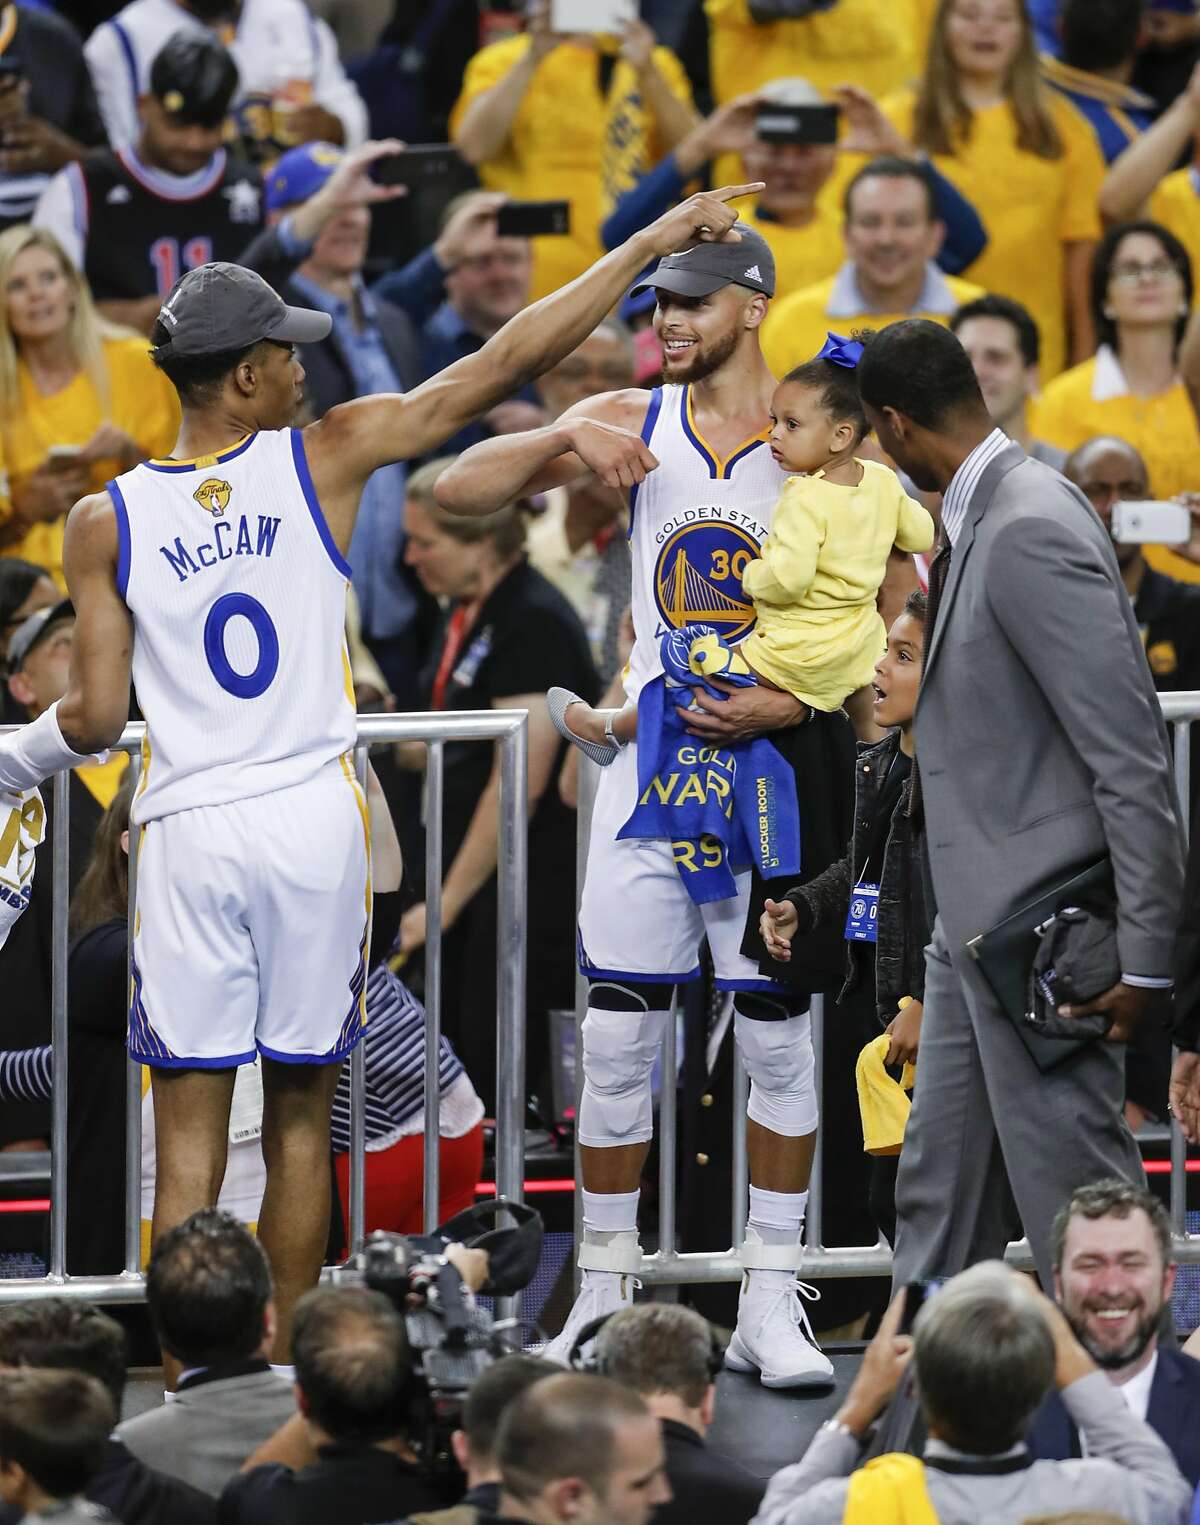 Golden State Warriors' Stephen Curry holds daughter, Ryan, as Patrick McCaw celebrates after the Golden State Warriors defeated the Cleveland Cavaliers 129-120 in Game 5 to win the 2017 NBA Finals at Oracle Arena on Monday, June 12, 2017 in Oakland, Calif.